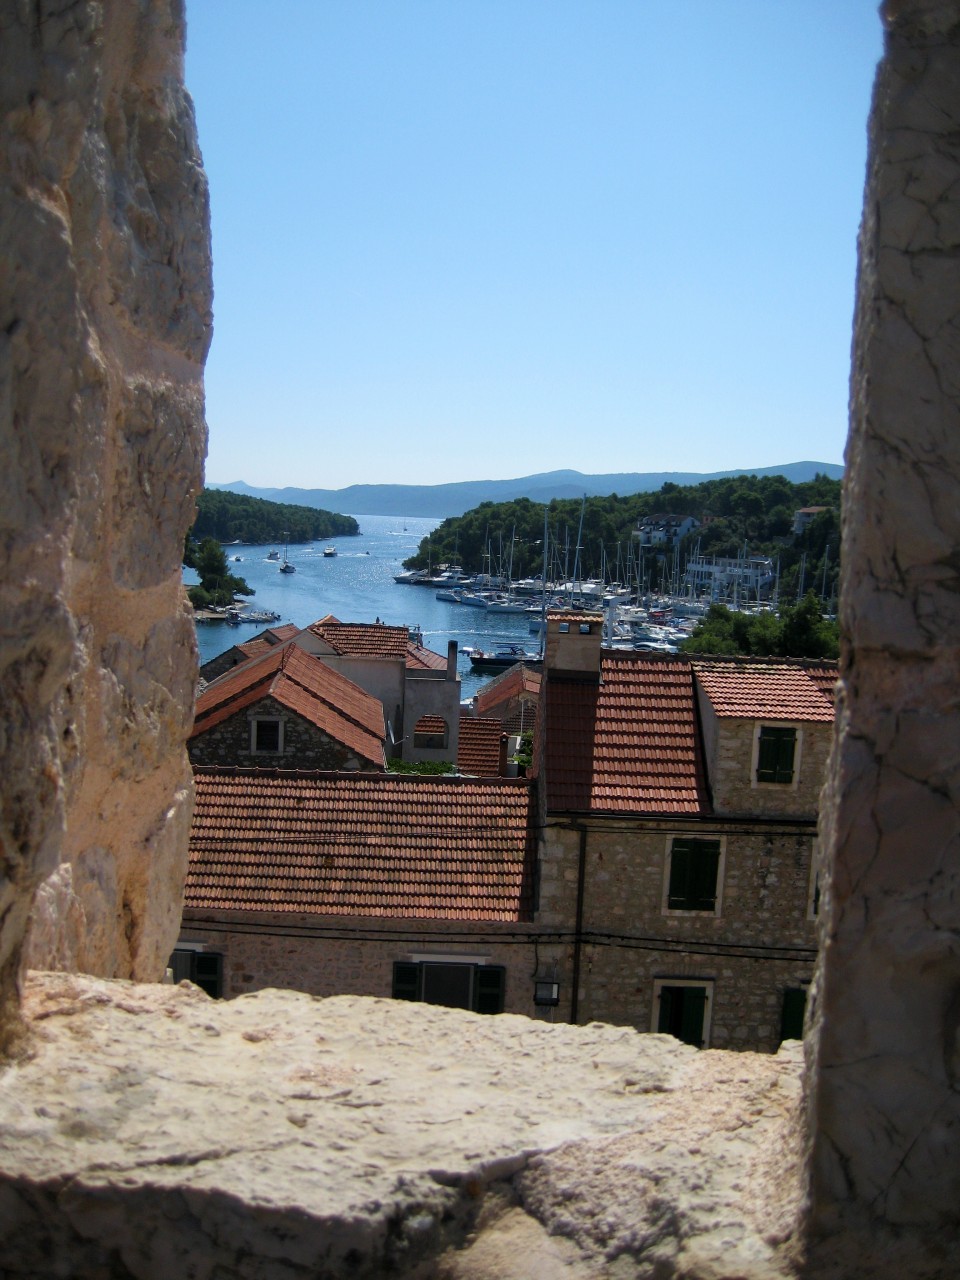 The view from the Fortress of St Mary over the bay